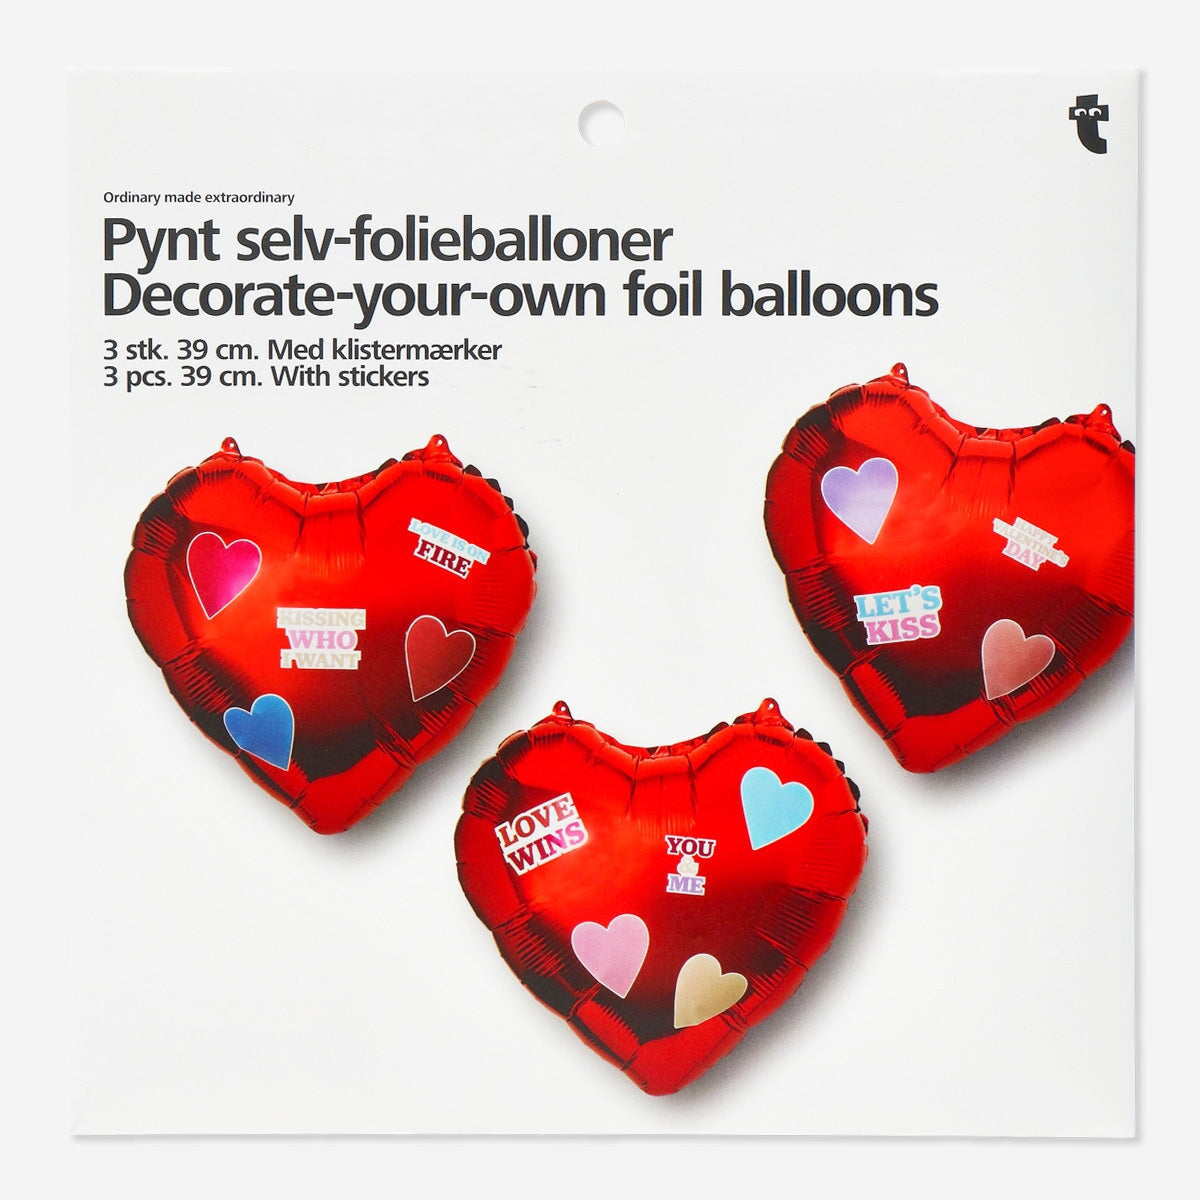 Foil balloons with stickers. 3 pcs Party Flying Tiger Copenhagen 